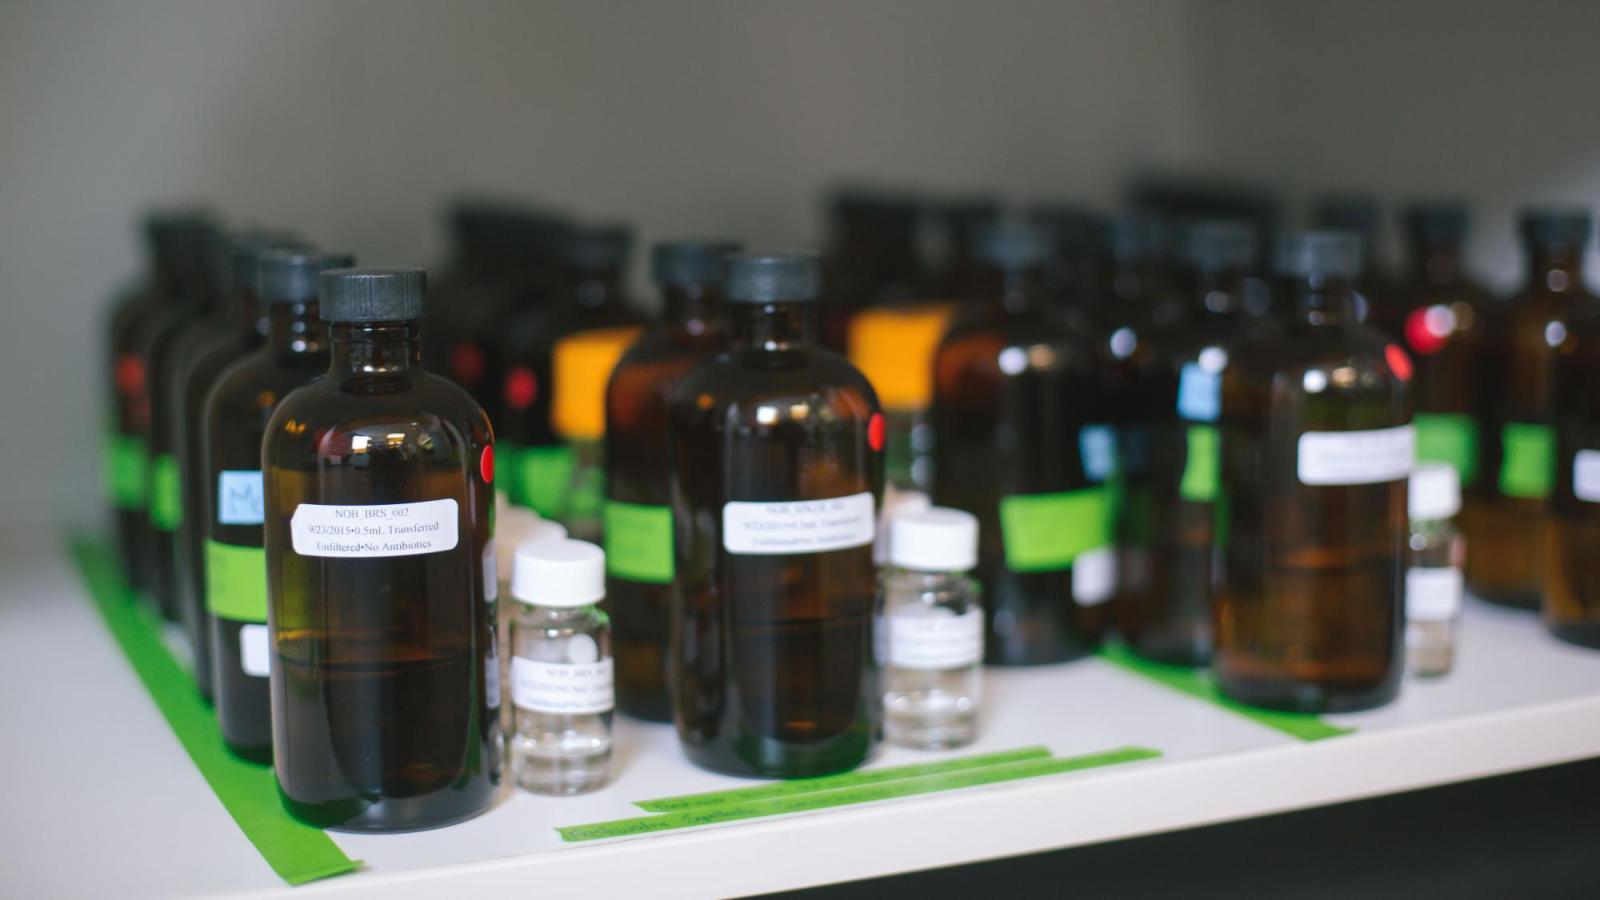 Research samples in bottles